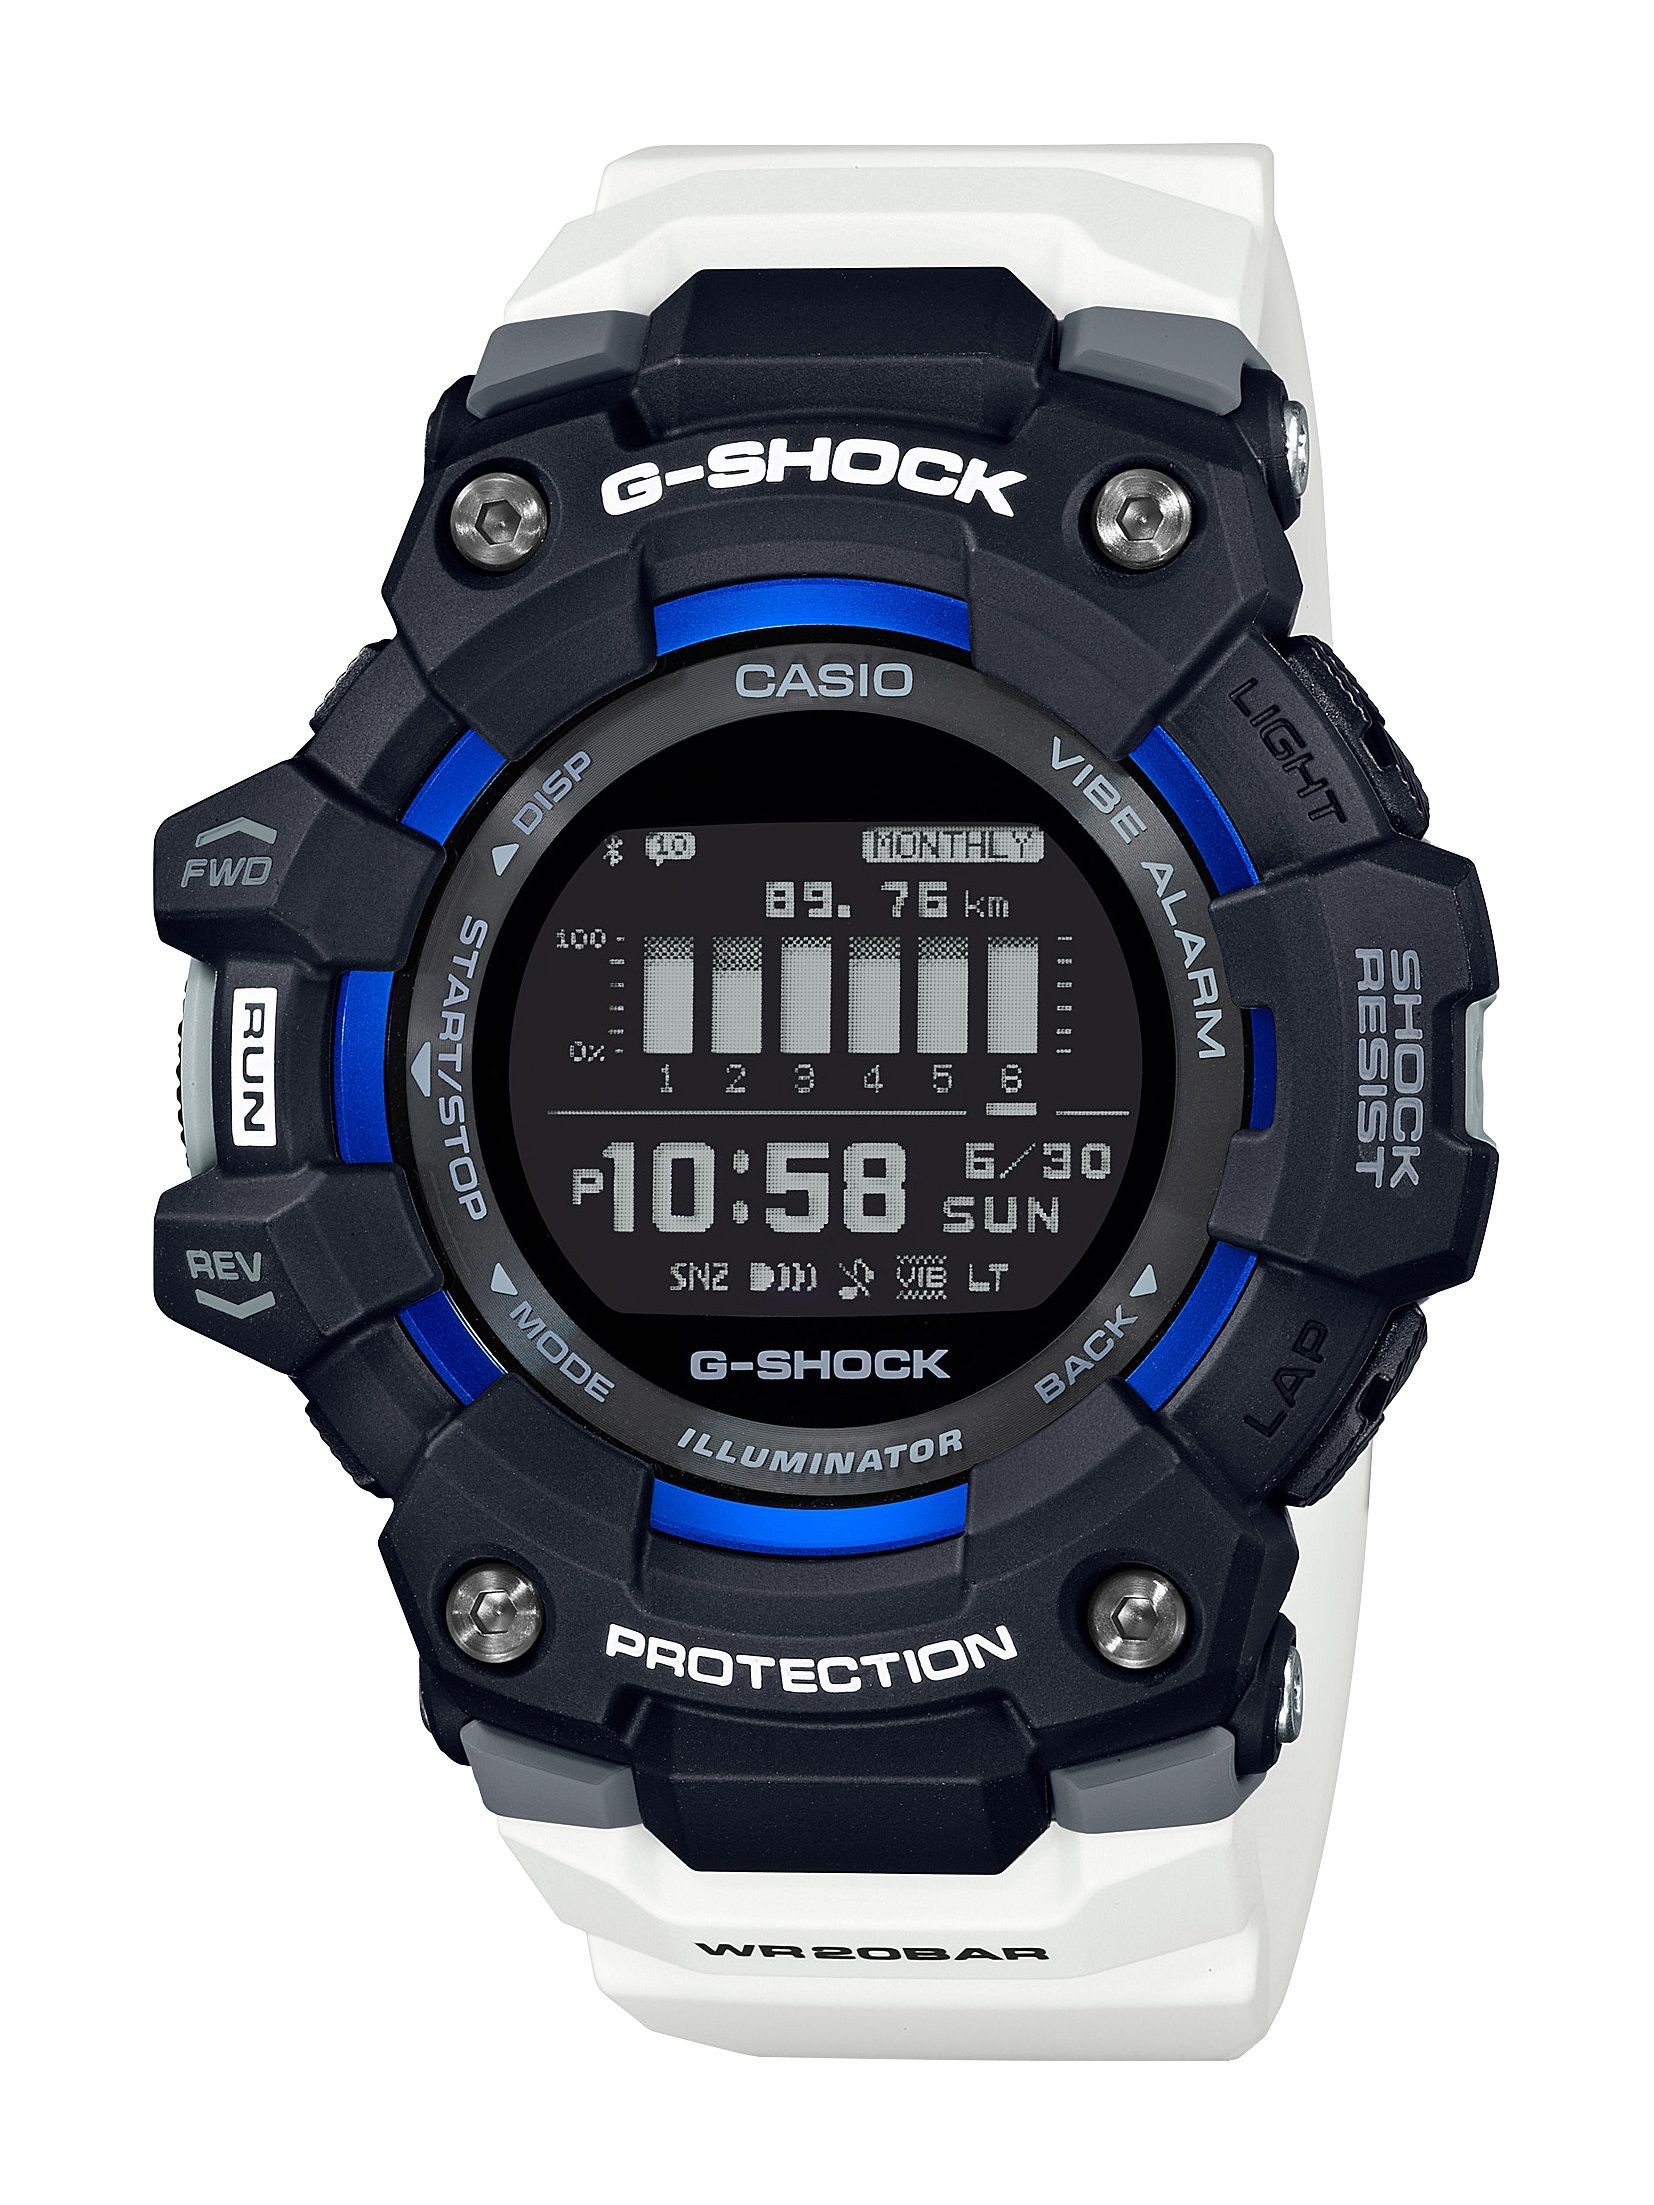 Casio G-Shock Move G-Squad Power Trainer GBD100 with Bluetooth Mobile Link Digital Watch